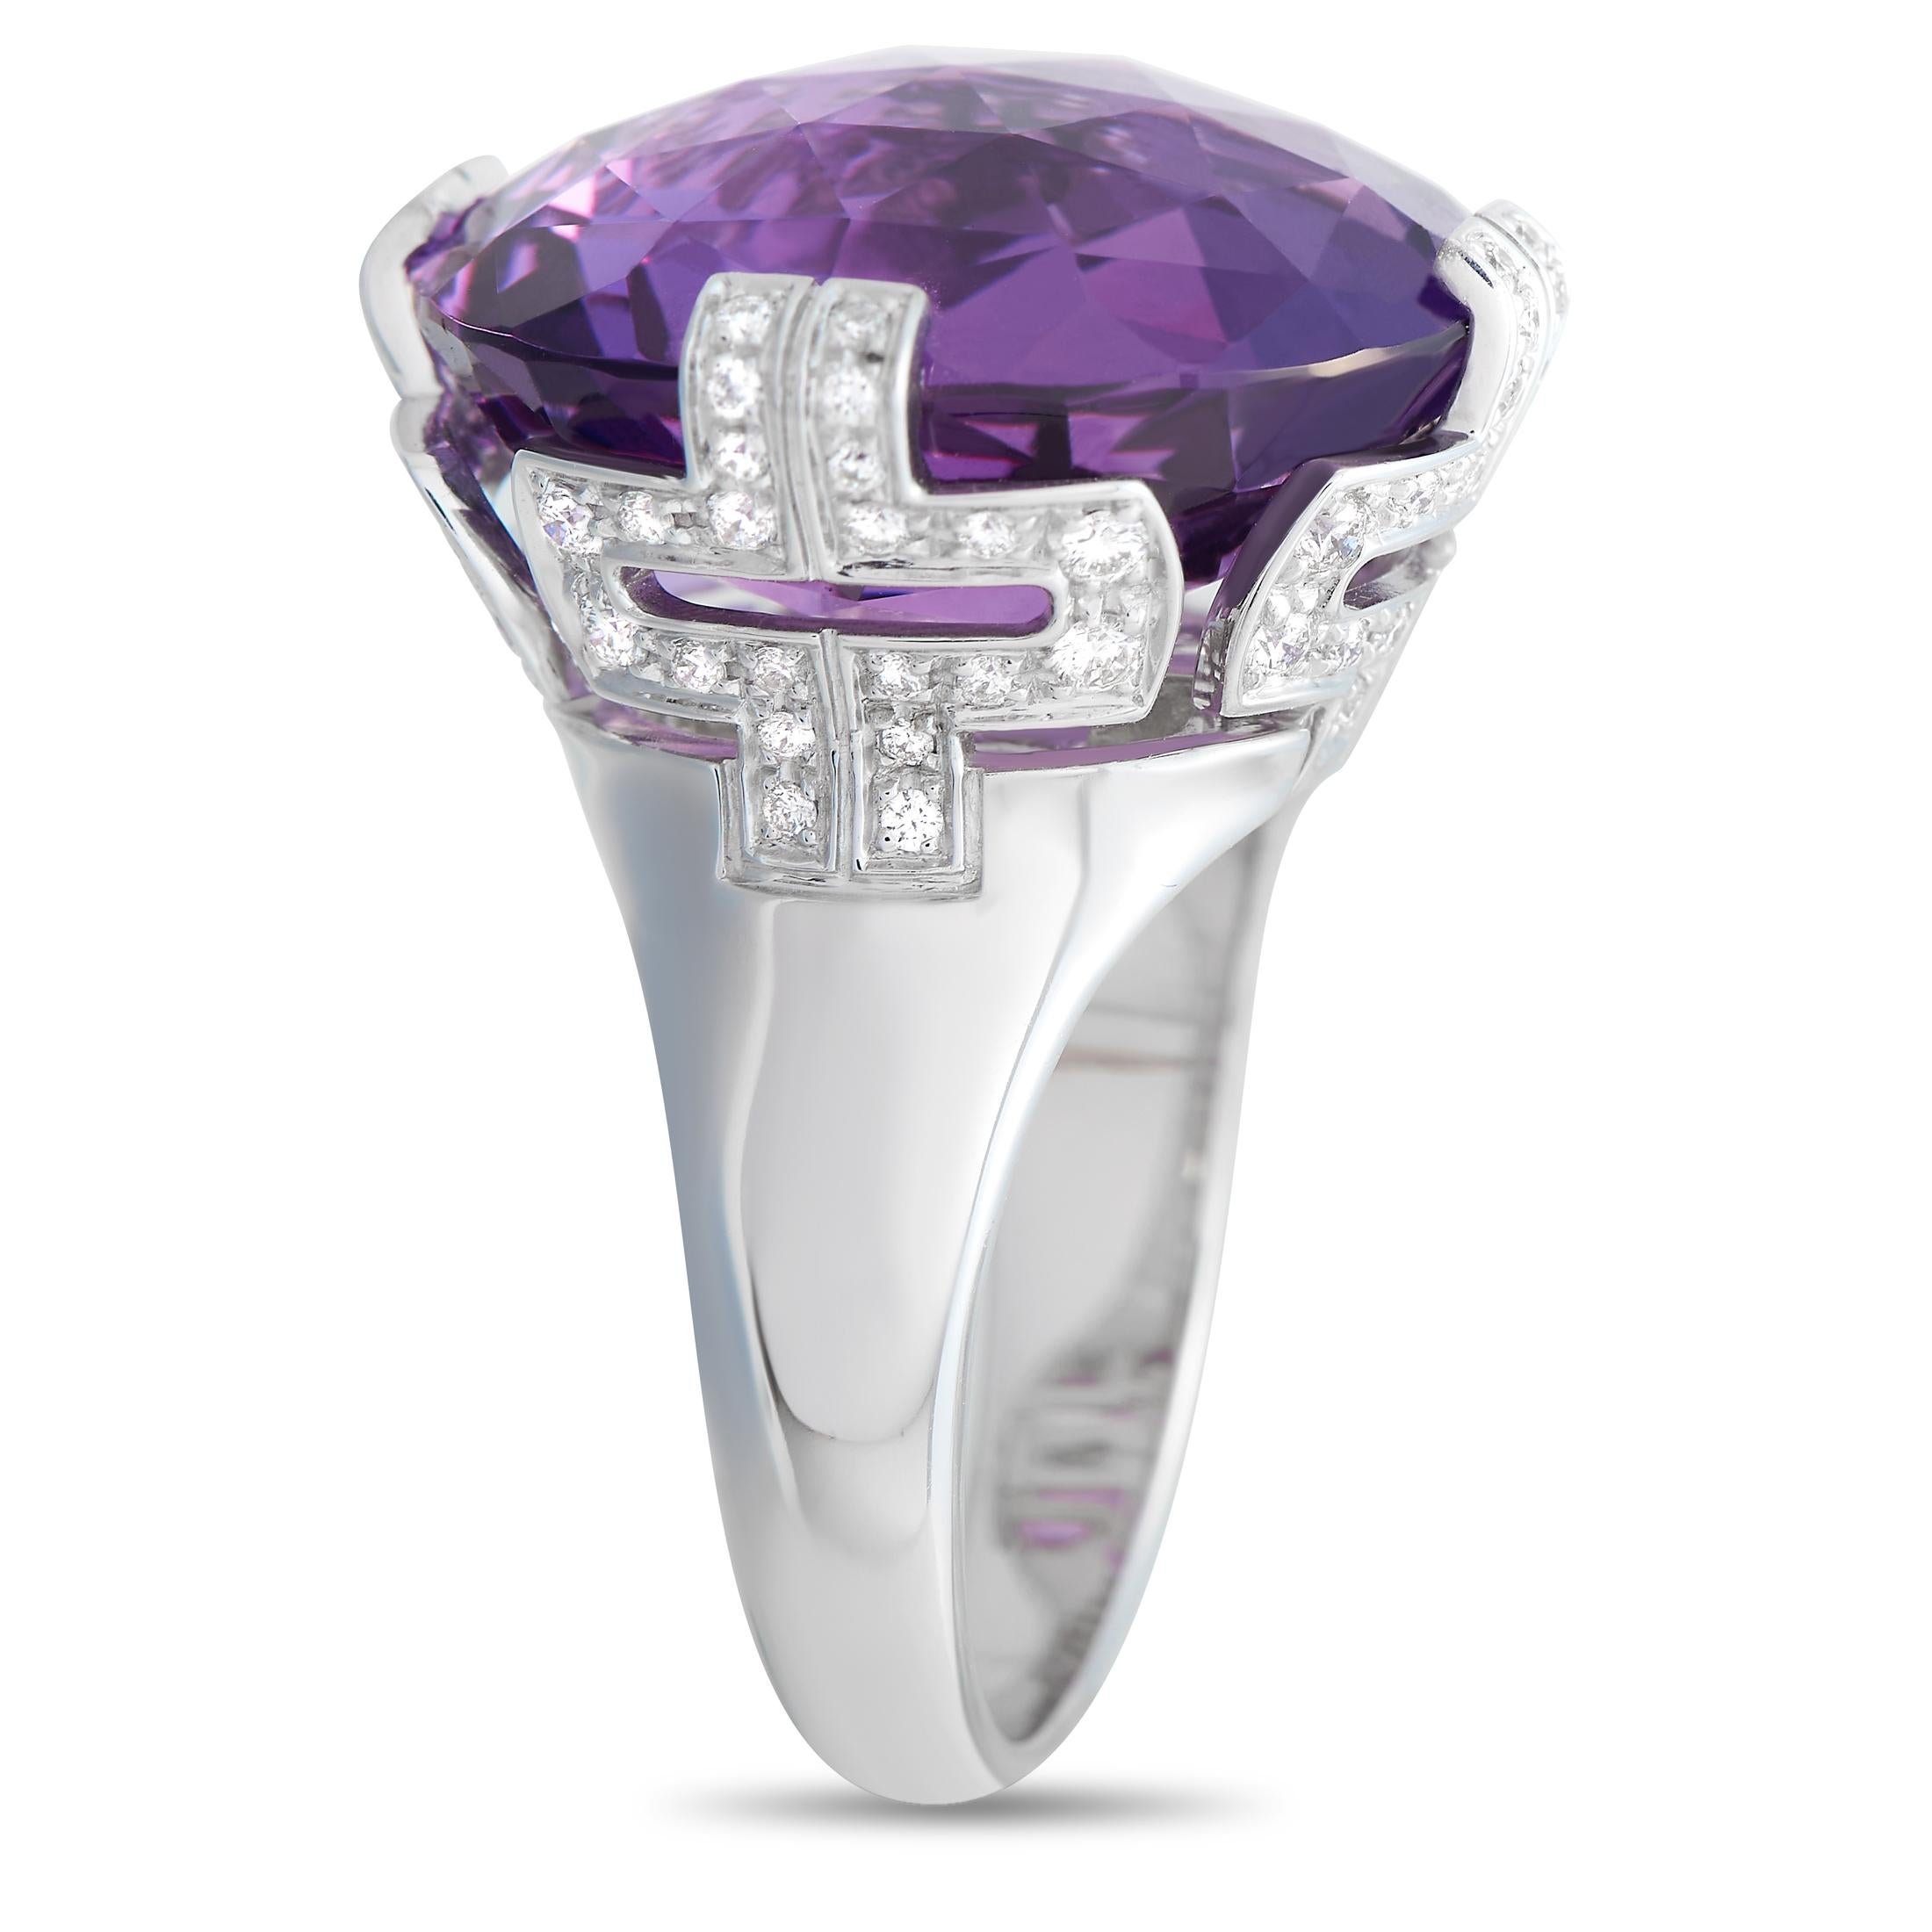 A breathtaking Amethyst gemstone makes a statement at the center of this exquisite Bvlgari Parentesi ring. On the sides, the sleek 18K White Gold setting is also elevated by glittering diamond accents totaling 0.70 carats. This piece possesses a 3mm